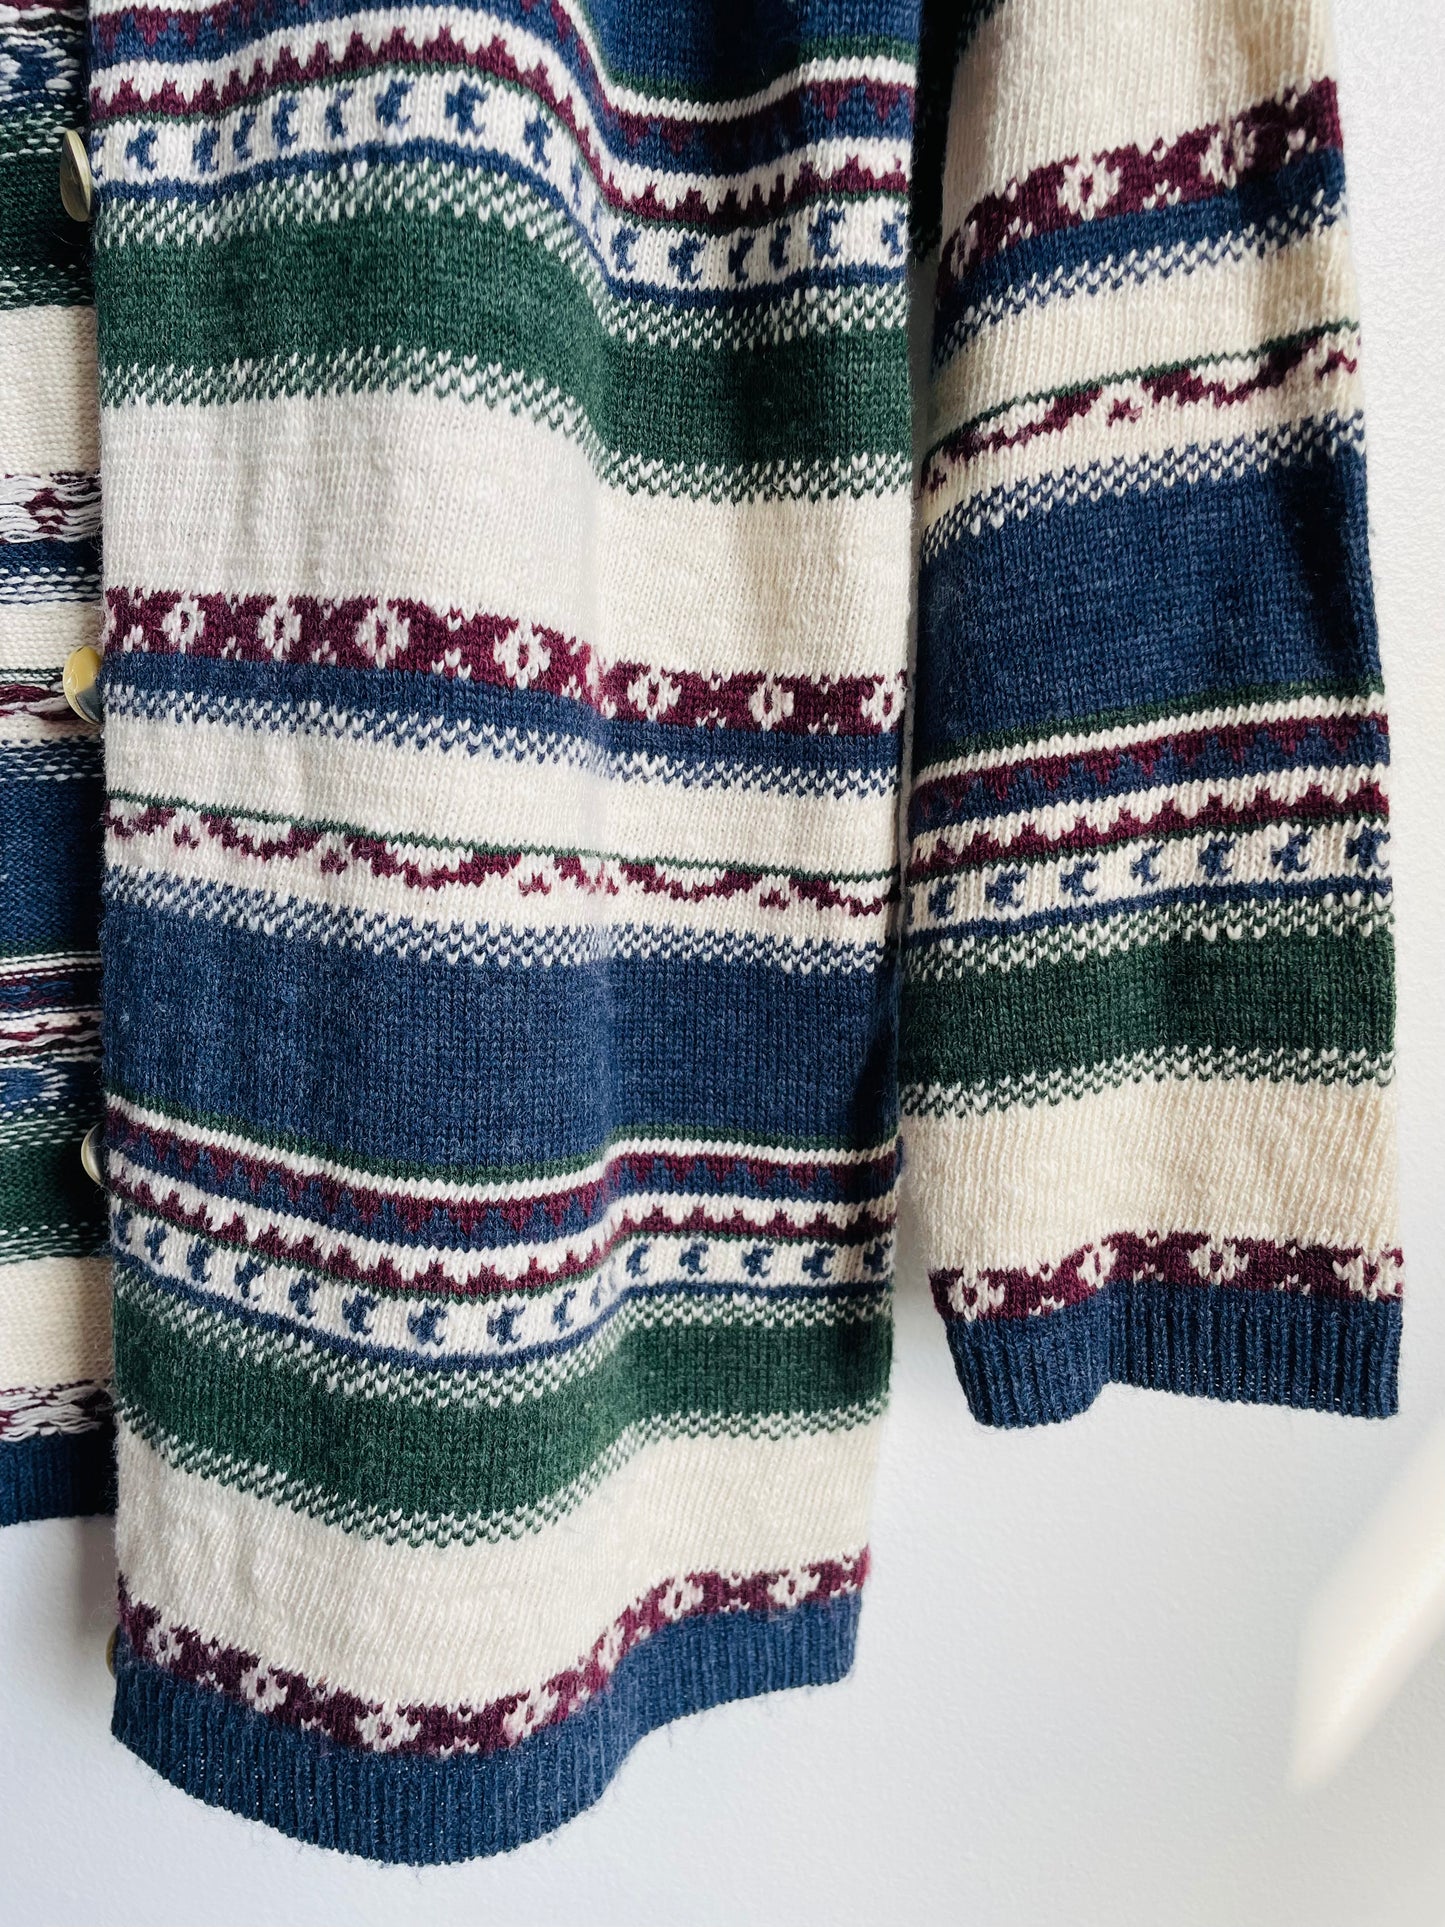 Jessie Button Up Cardigan Sweater with Blue, Maroon, Green, & Cream Pattern